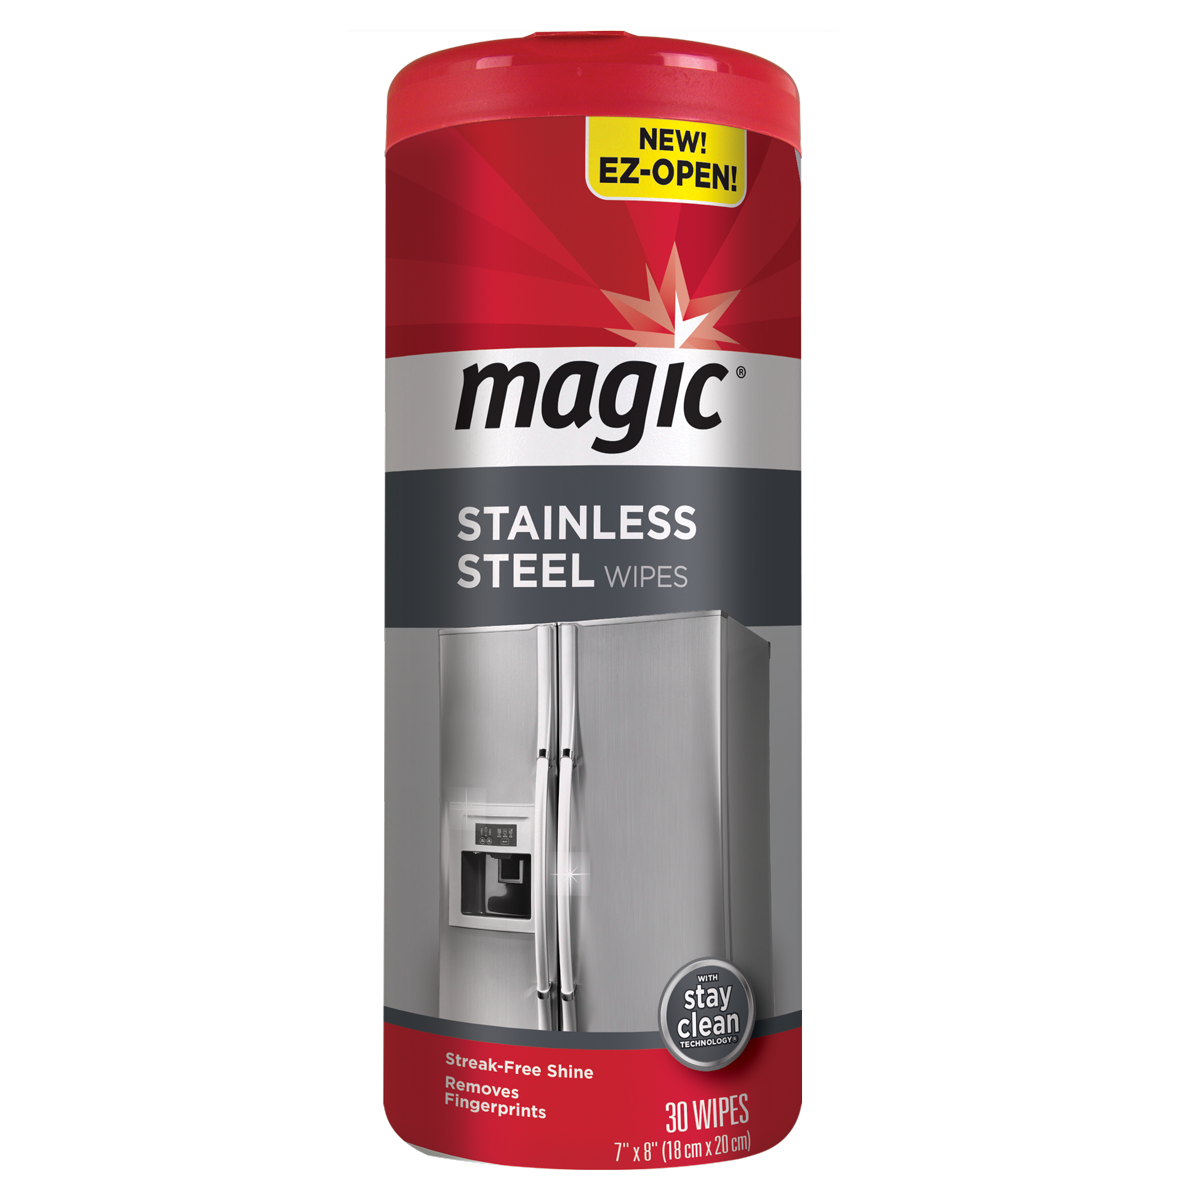 1609730631_08018172ImageMagicStainlessSteelWipes.png